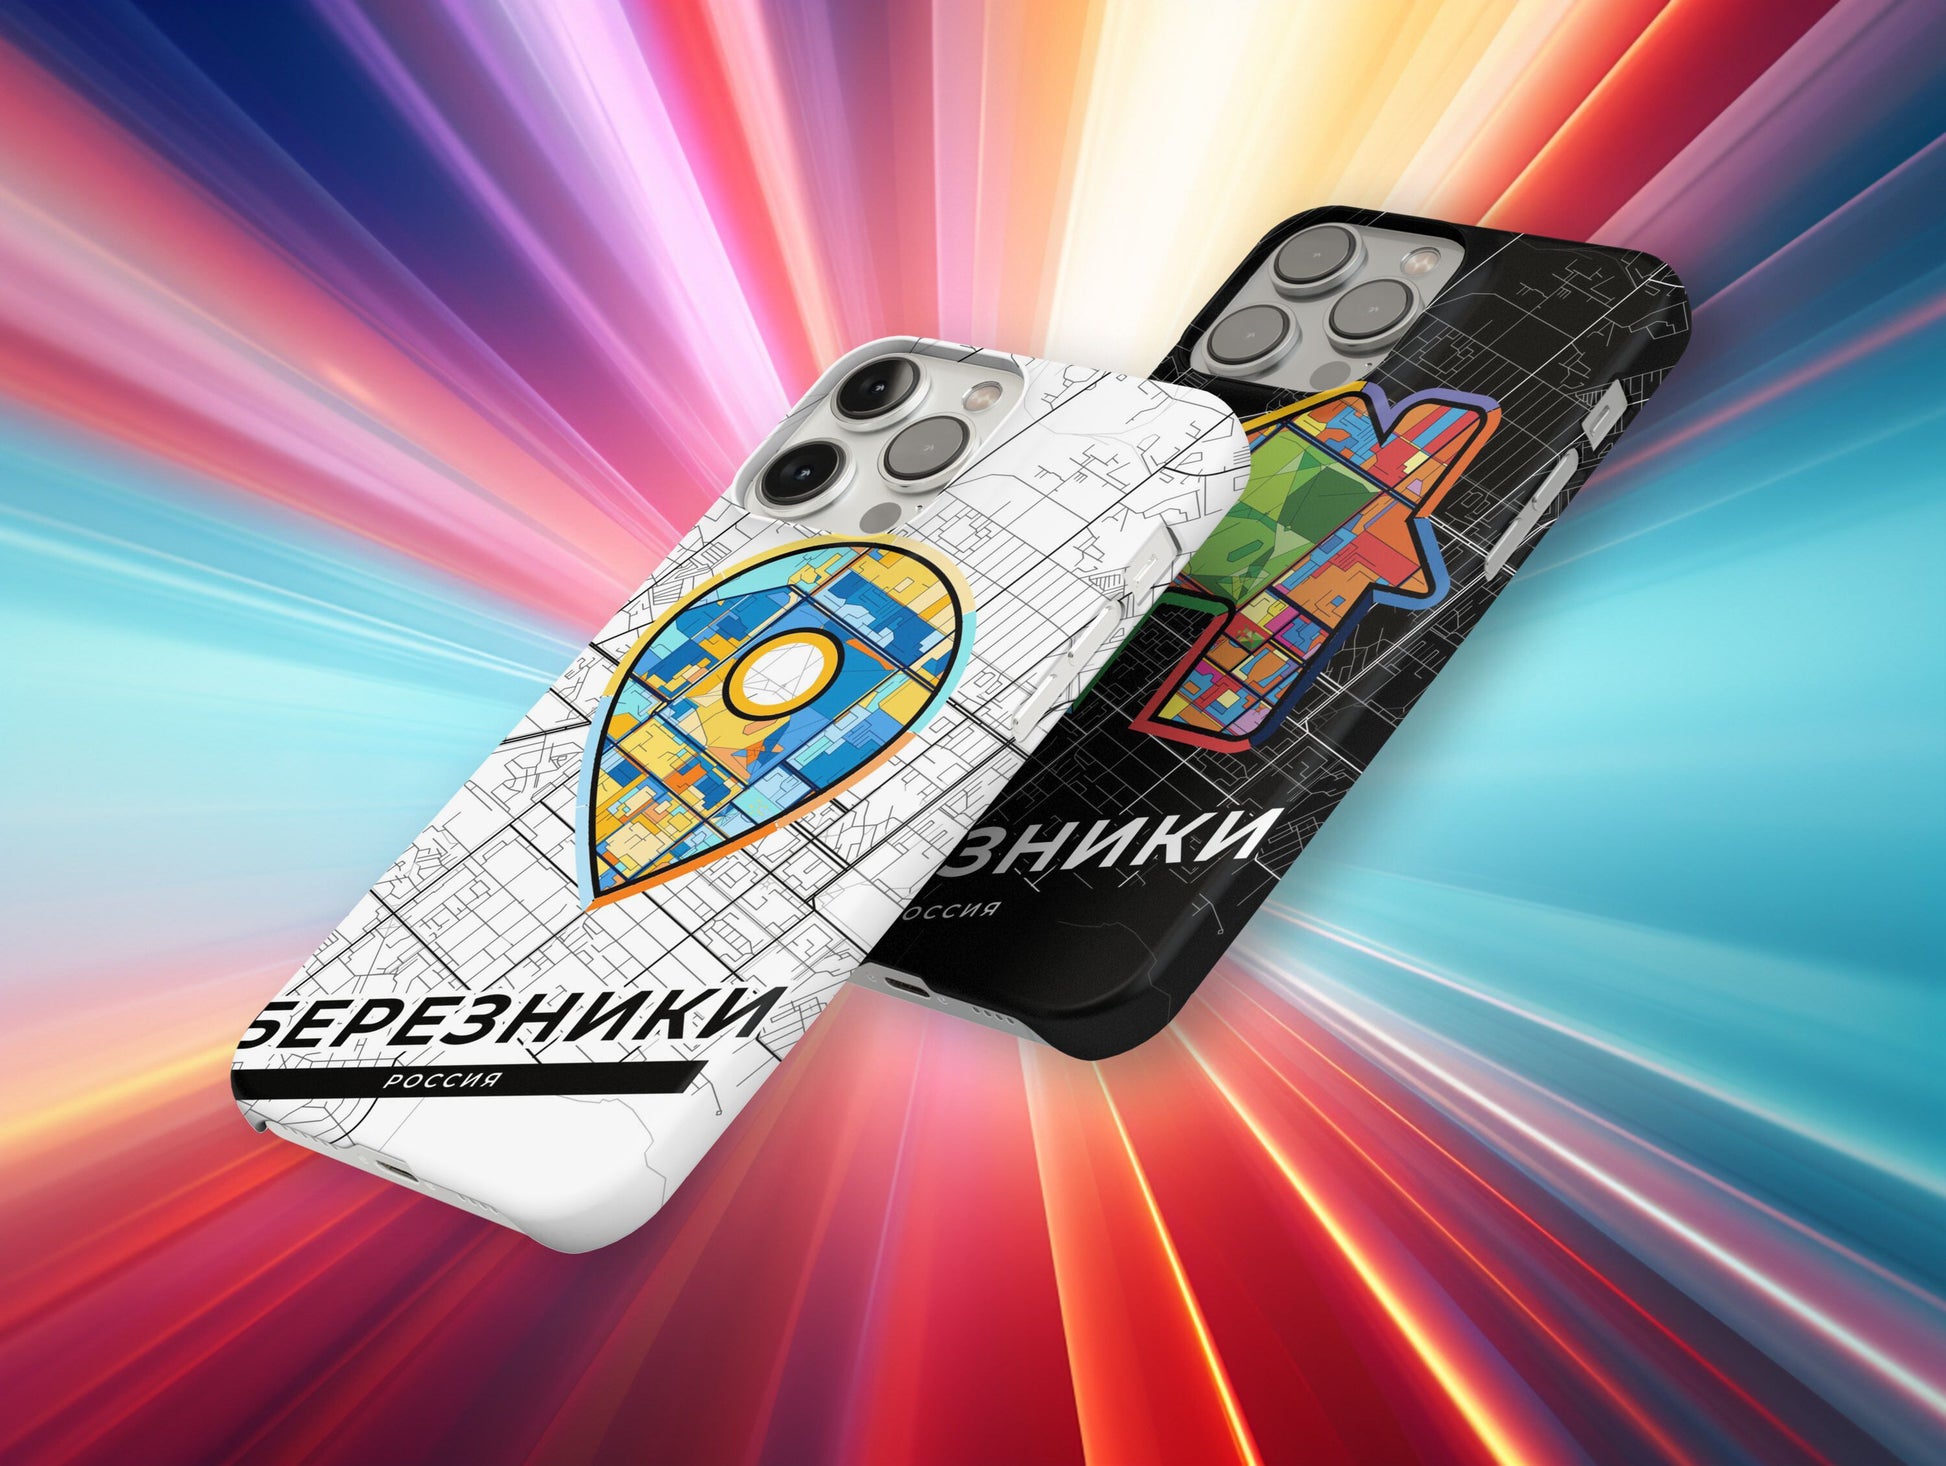 Berezniki Russia slim phone case with colorful icon. Birthday, wedding or housewarming gift. Couple match cases.